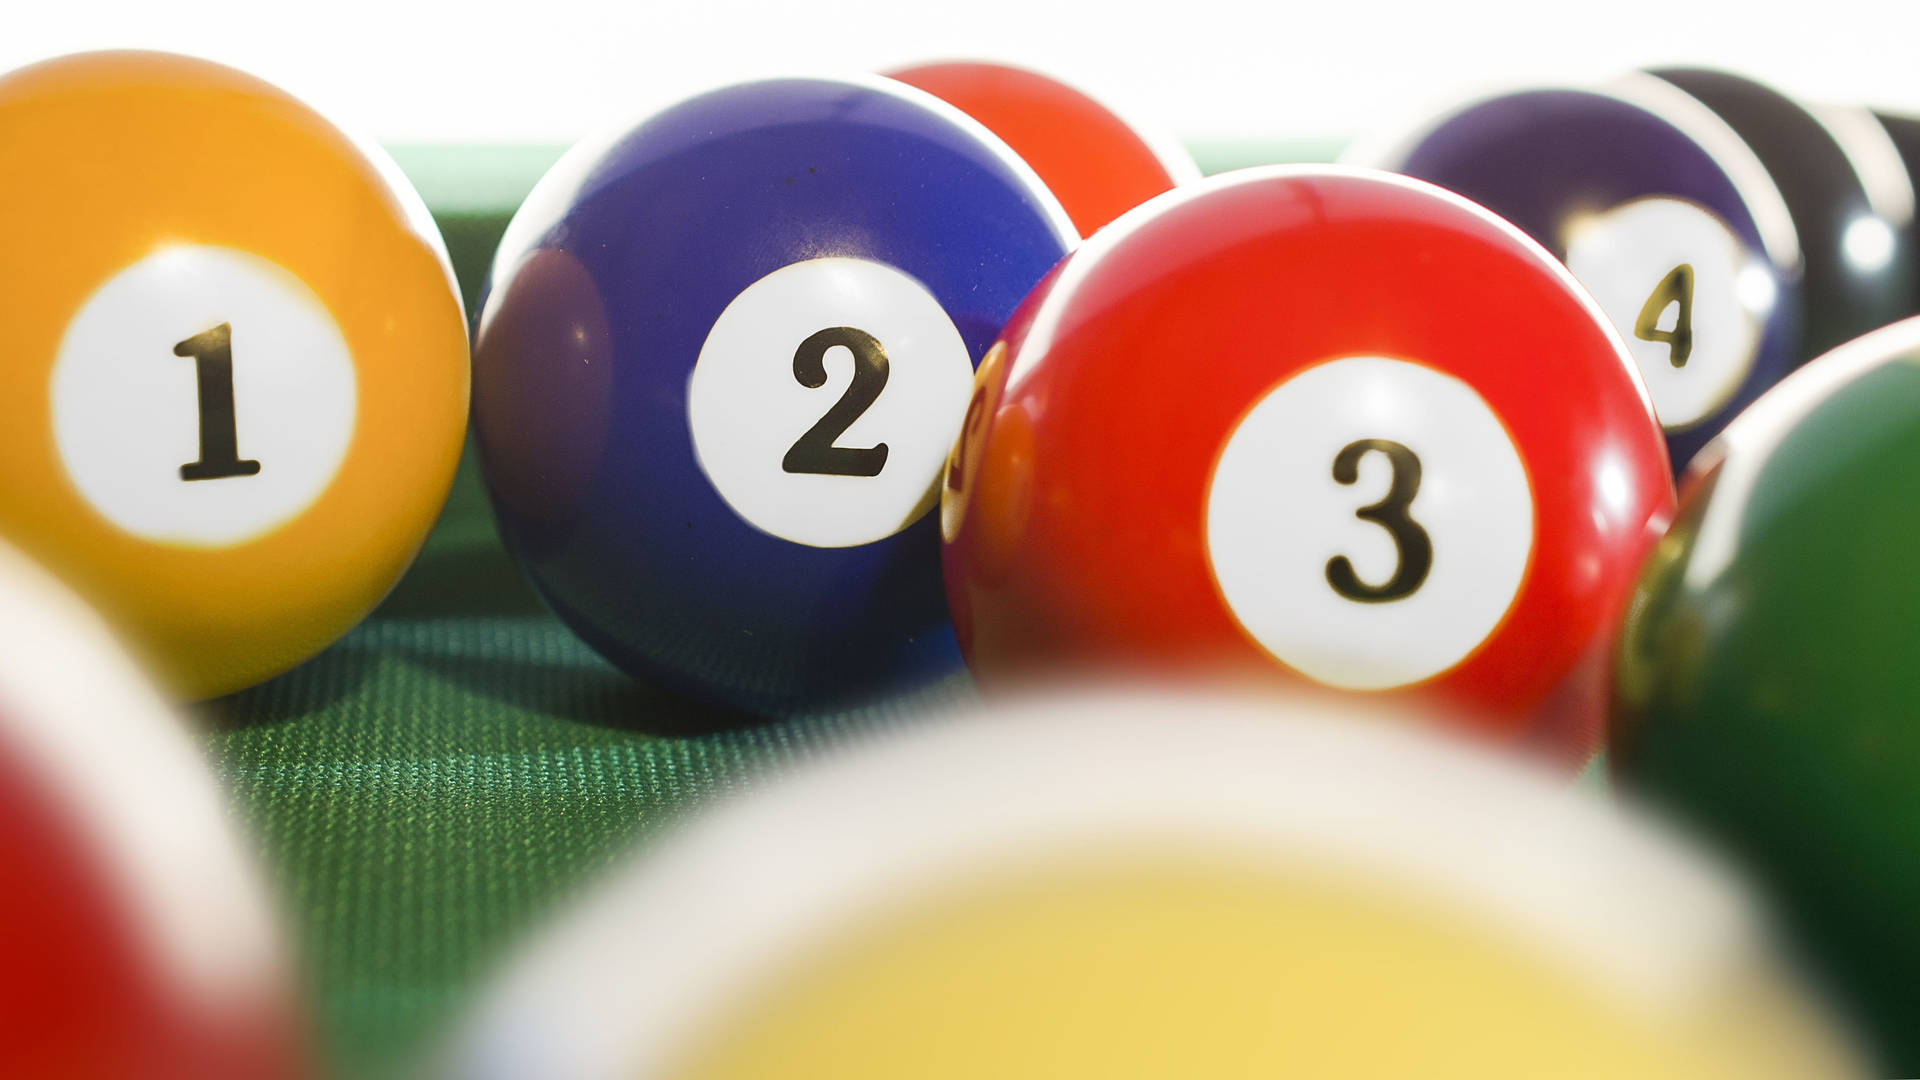 Numbered Snooker Balls